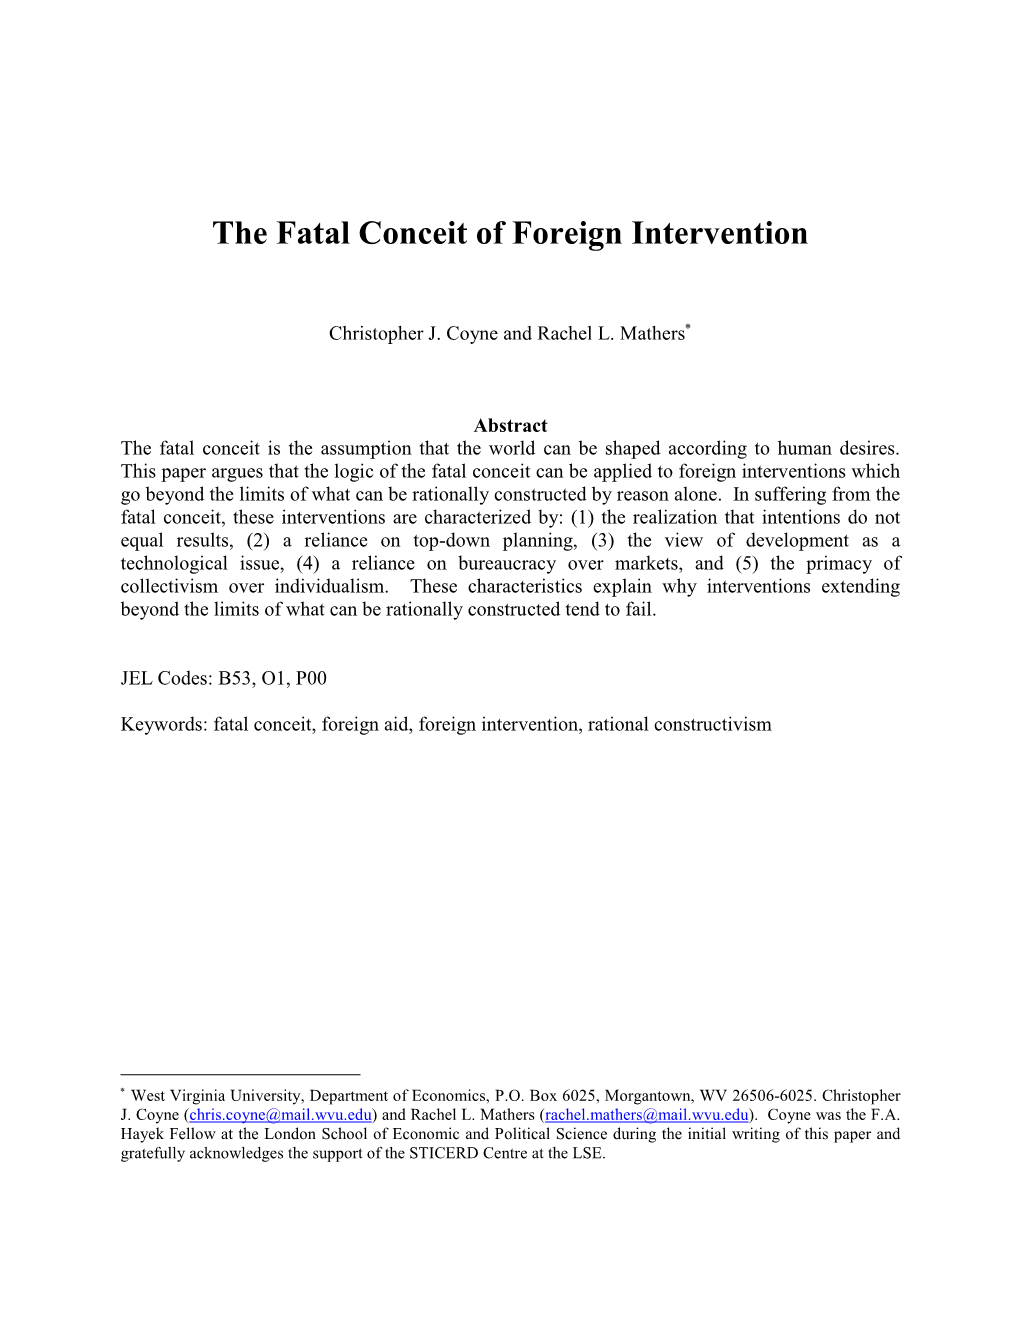 The Fatal Conceit of Foreign Intervention